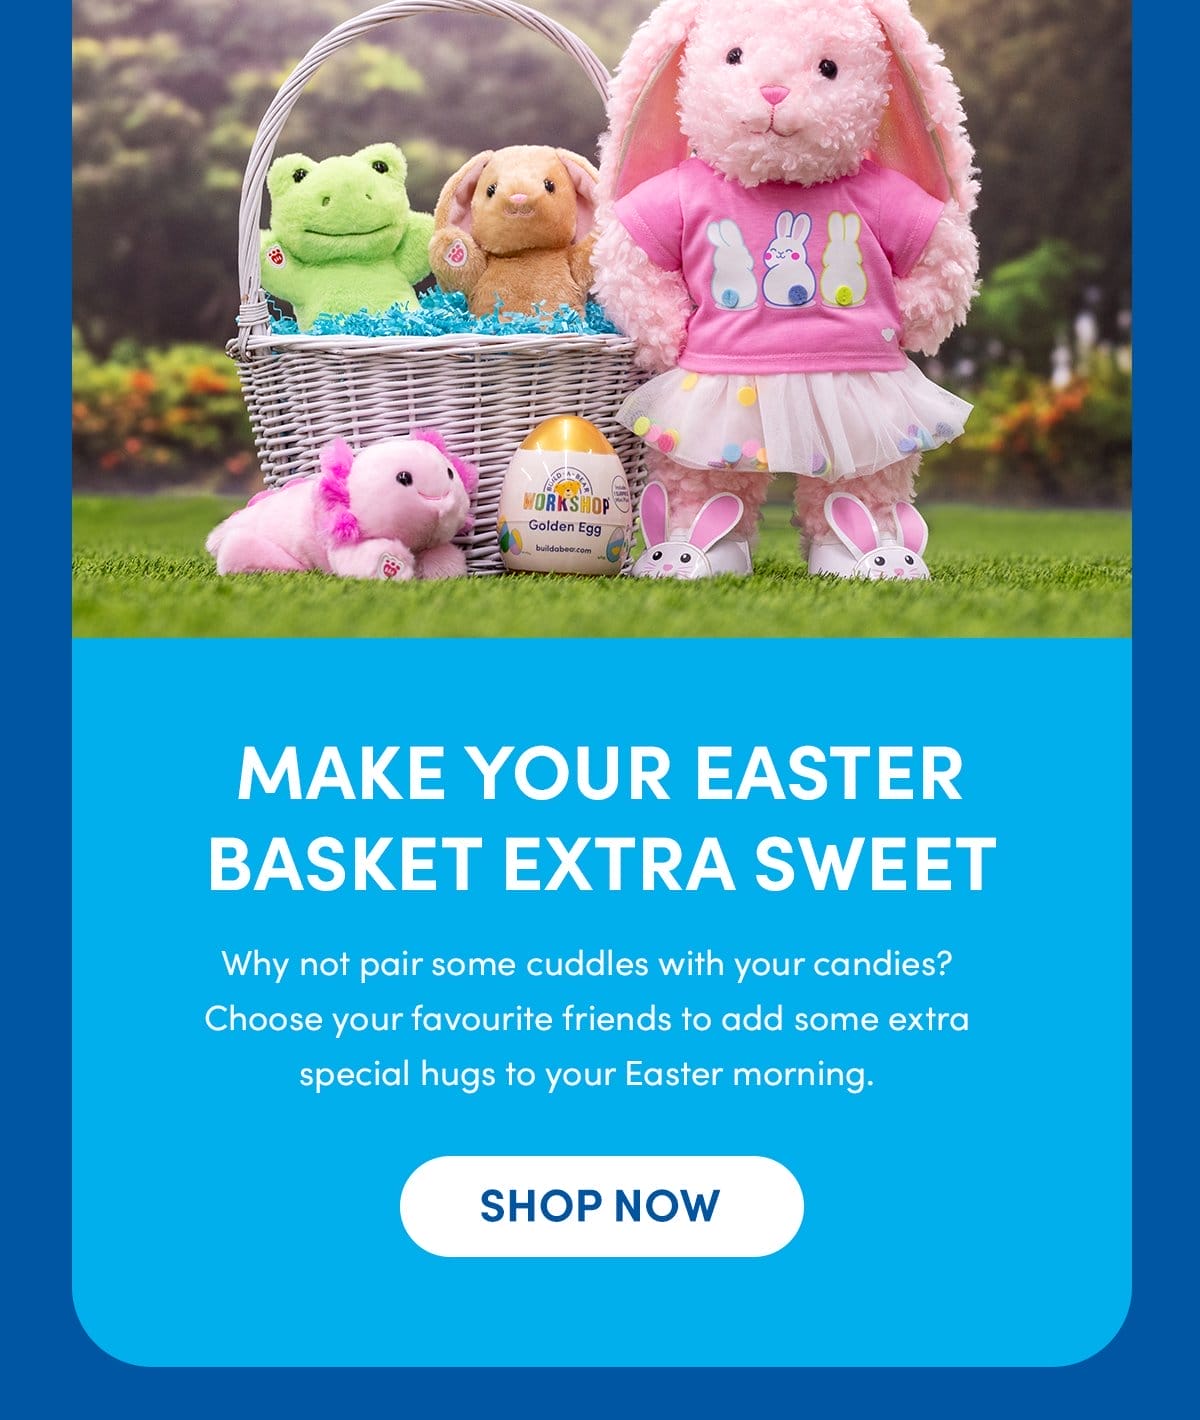 MAKE YOUR EASTER BASKET EXTRA SWEET | Why not pair some cuddles with your candies? Choose your favourite friends to add some extra special hugs to your Easter morning. | SHOP NOW